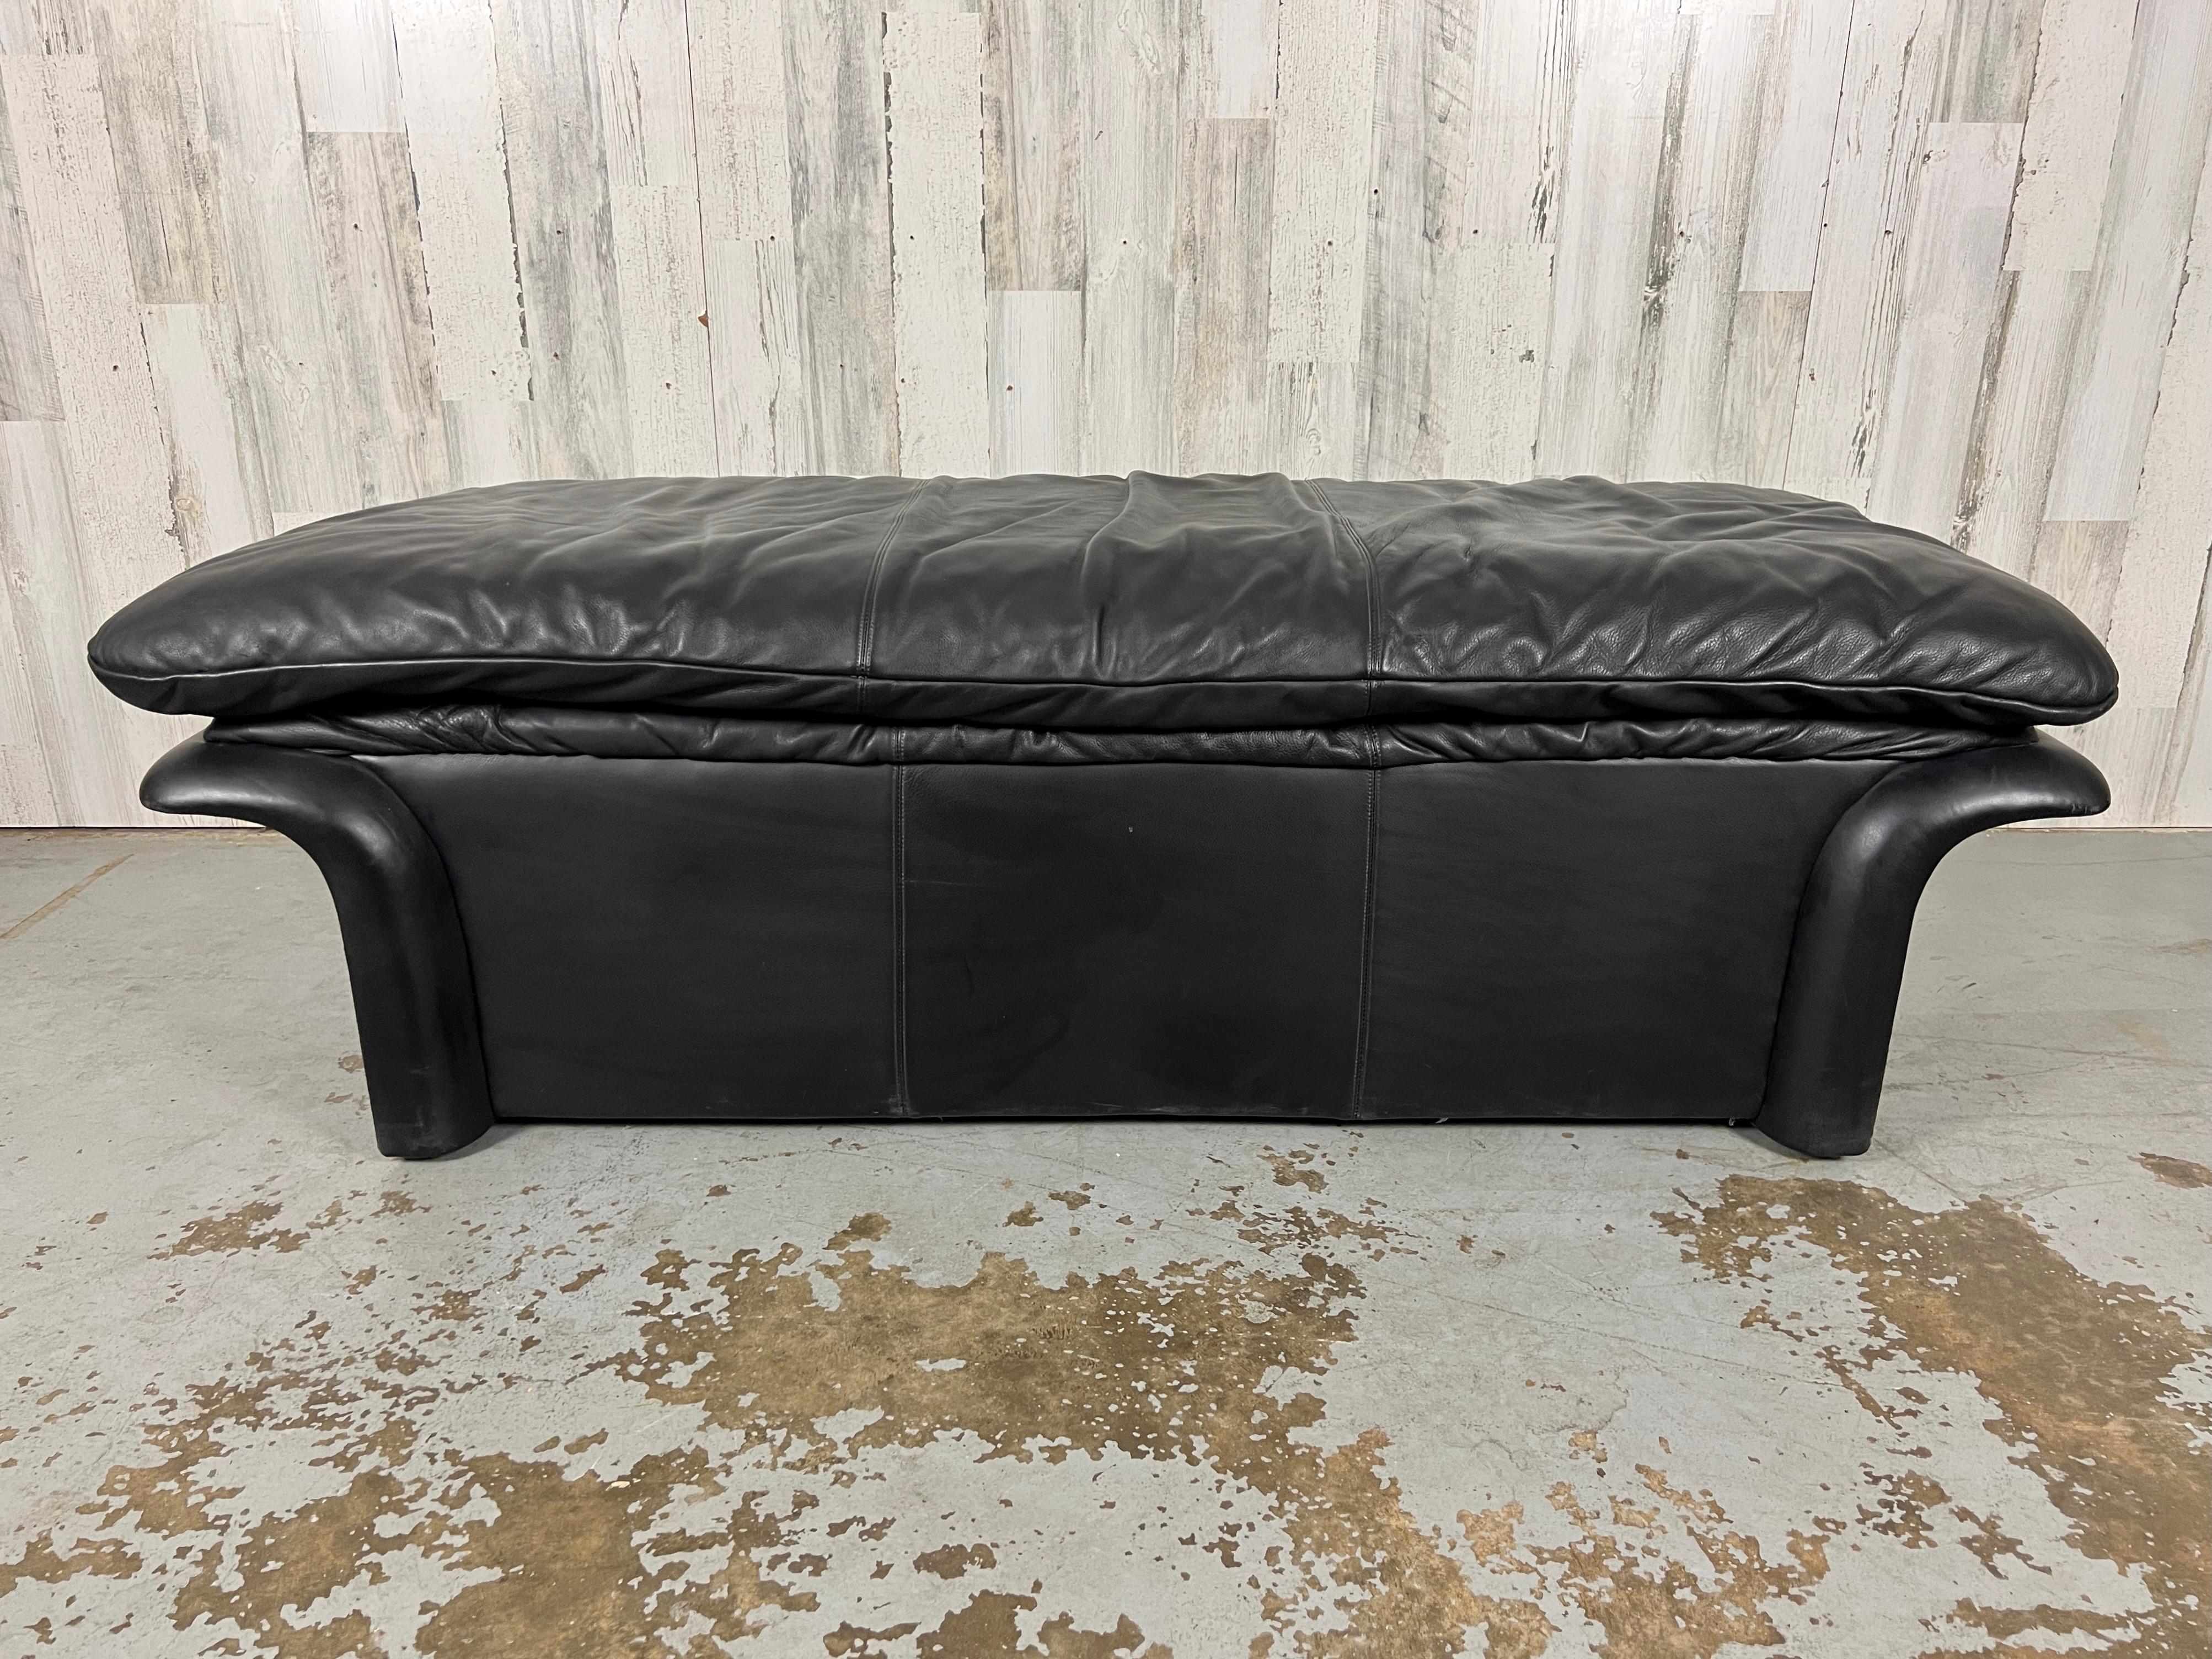 Post Modern black leather bench with curved handle ends.